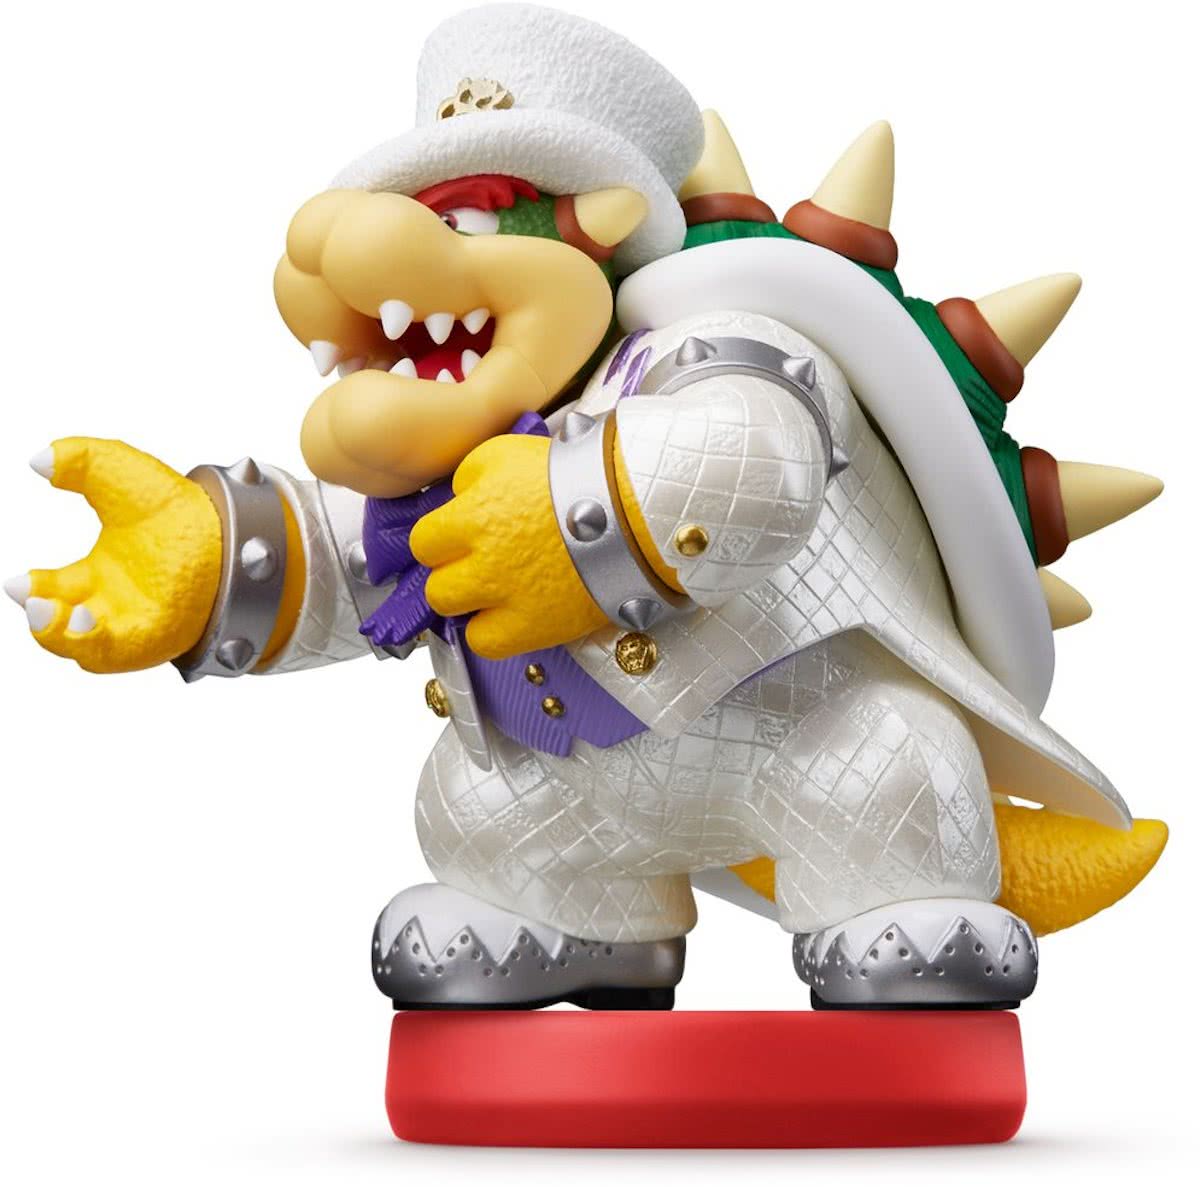 amiibo Super Mario Odyssey Collection - Wedding Bowser - Wii U + 3DS + Switch